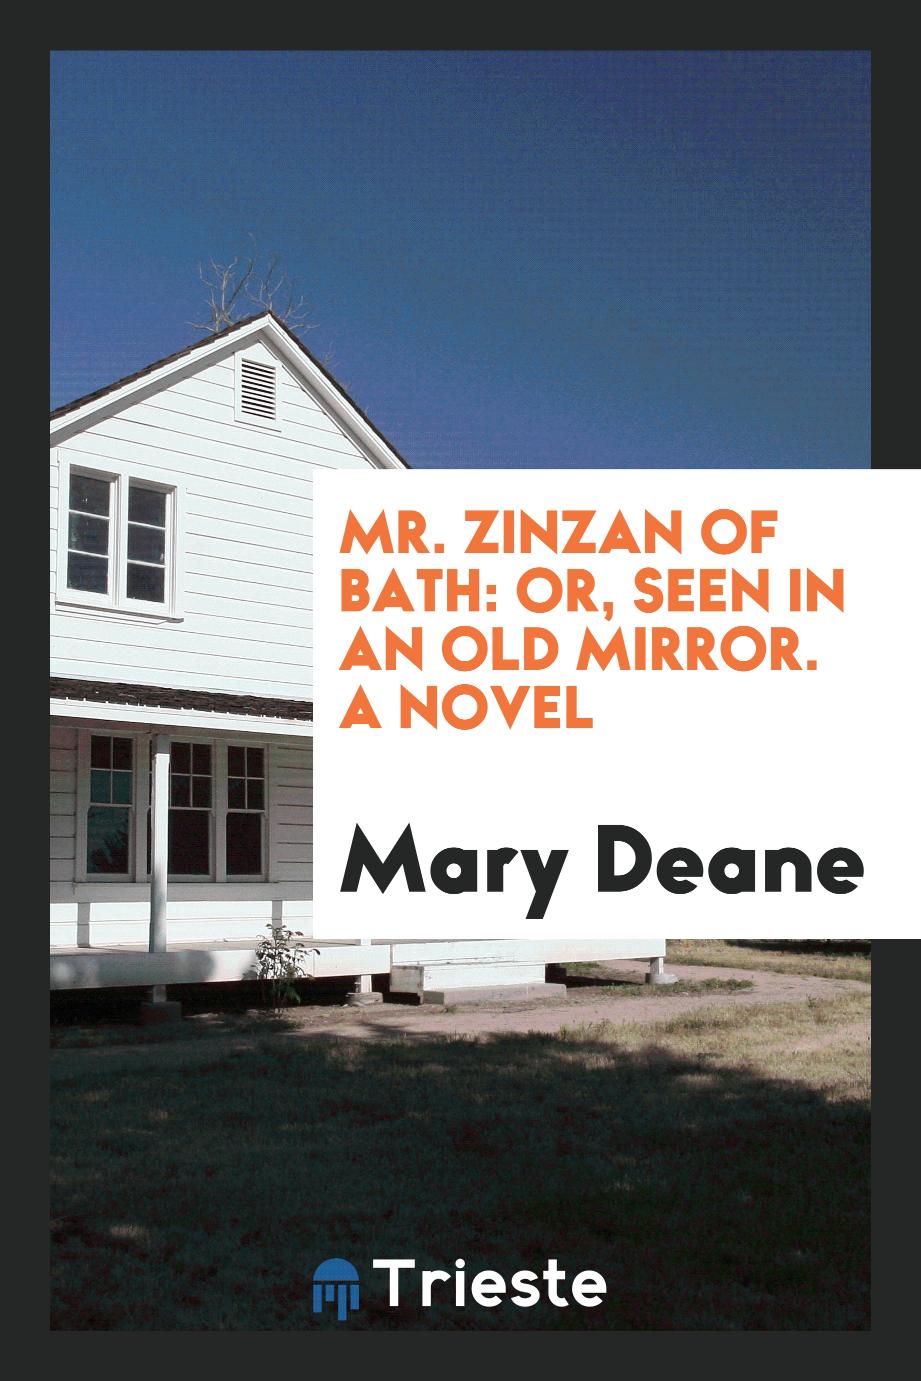 Mr. Zinzan of Bath: Or, Seen in an Old Mirror. A Novel